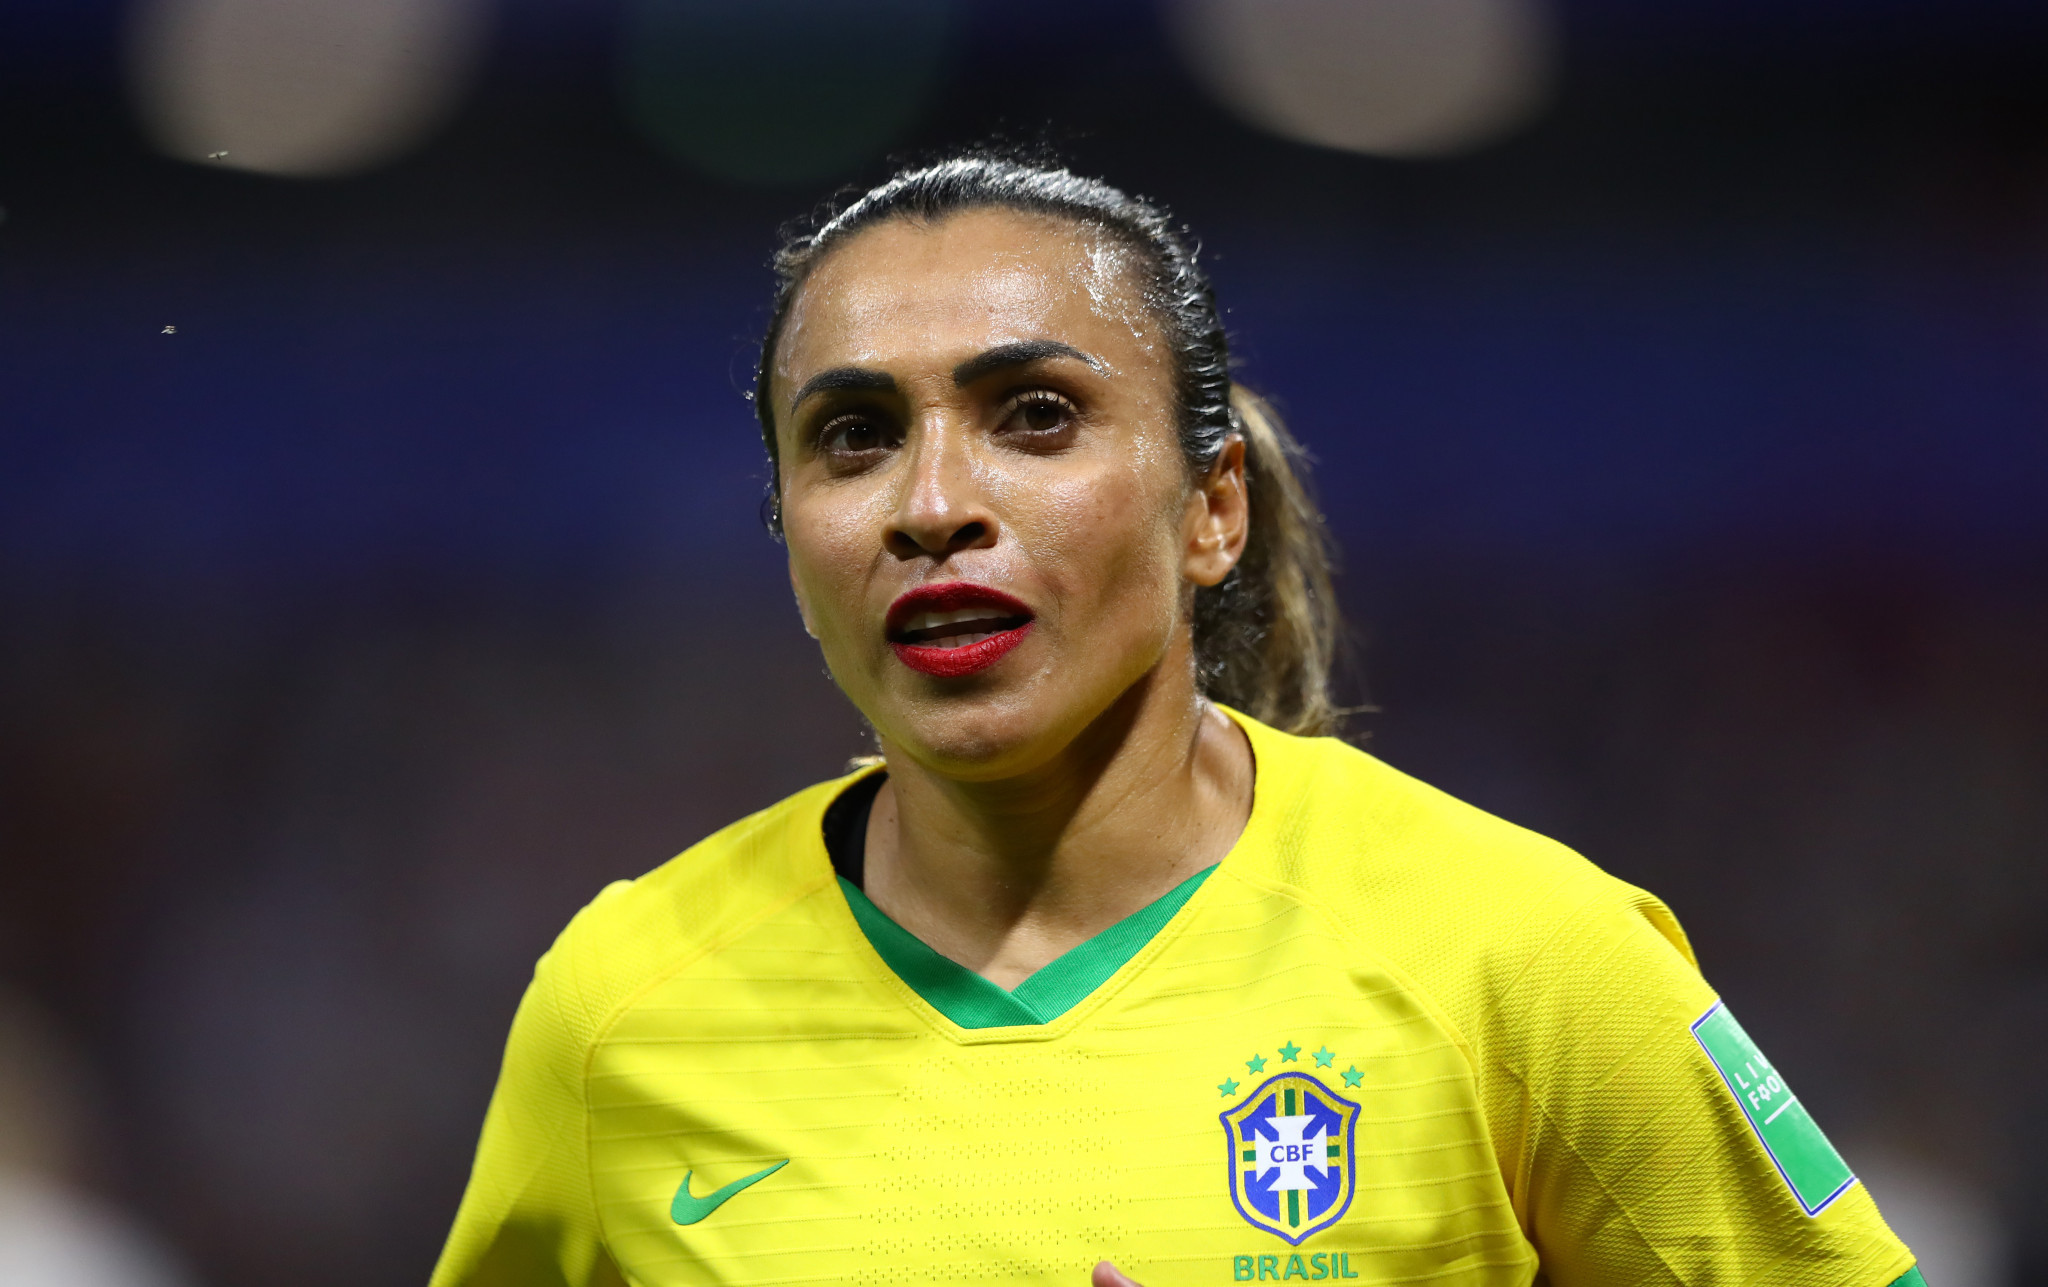 Brazilian footballer Marta also participated in the discussion hosted by UN75, calling for women's sport to not be forgotten post the coronavirus pandemic ©Getty Images